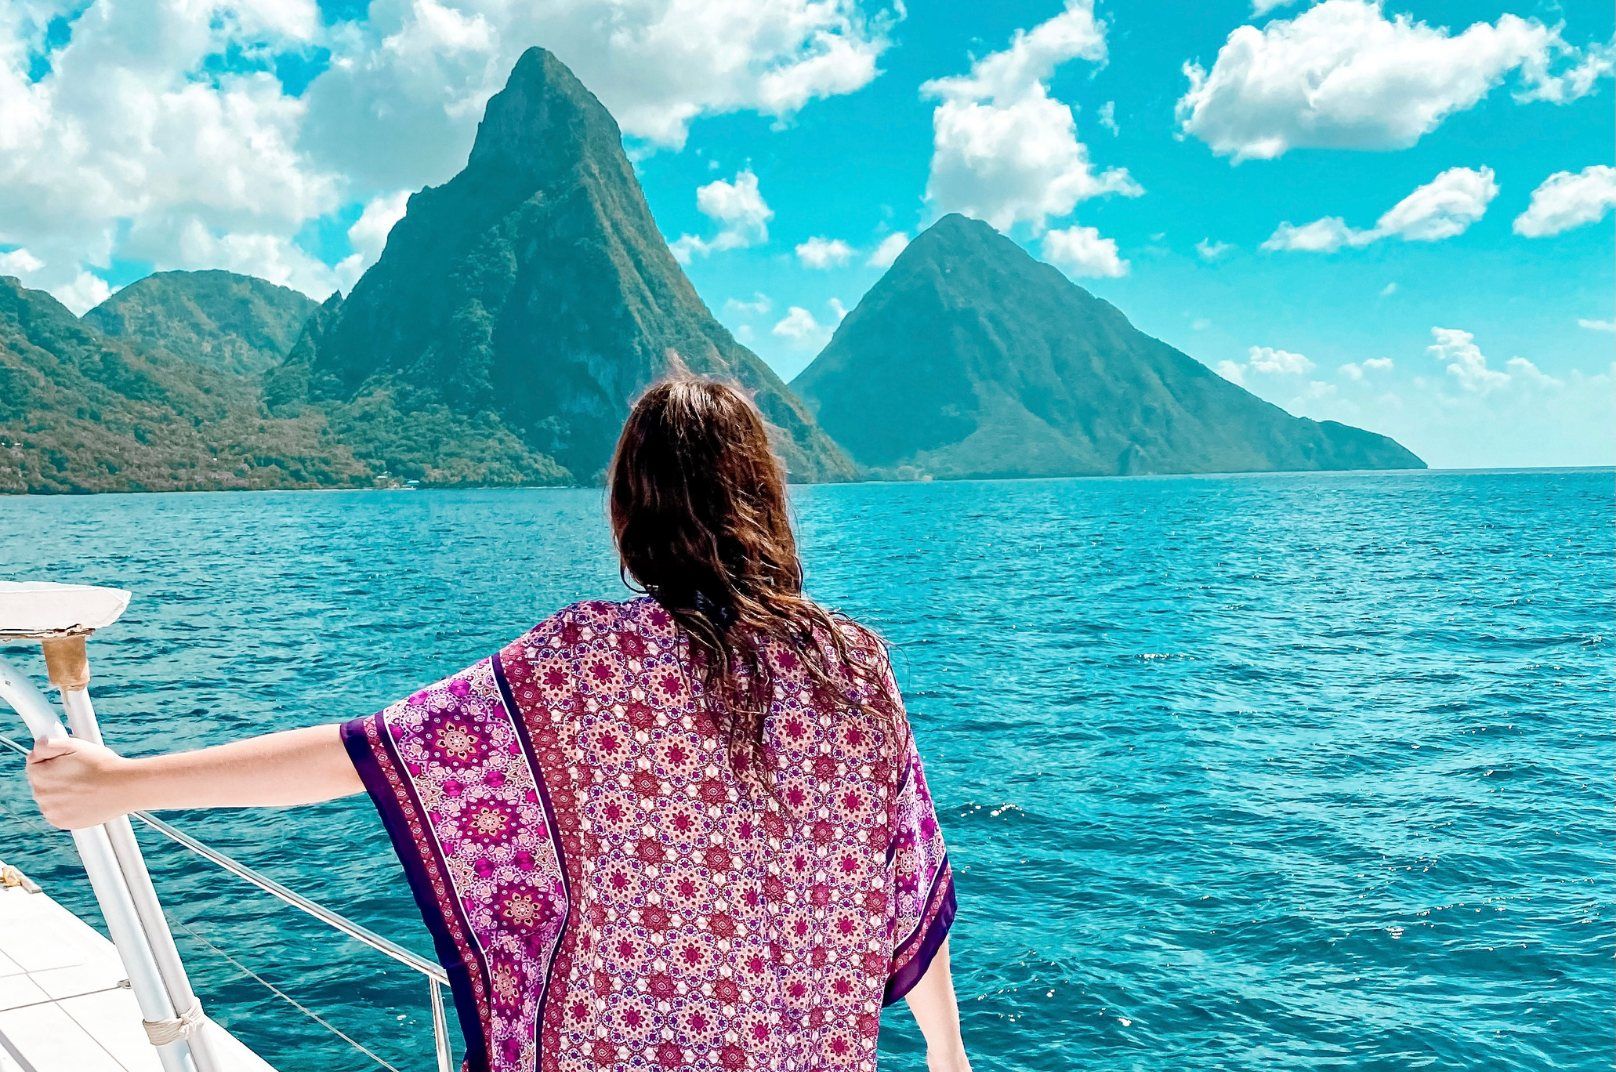 St. Lucia things to do on a honeymoon